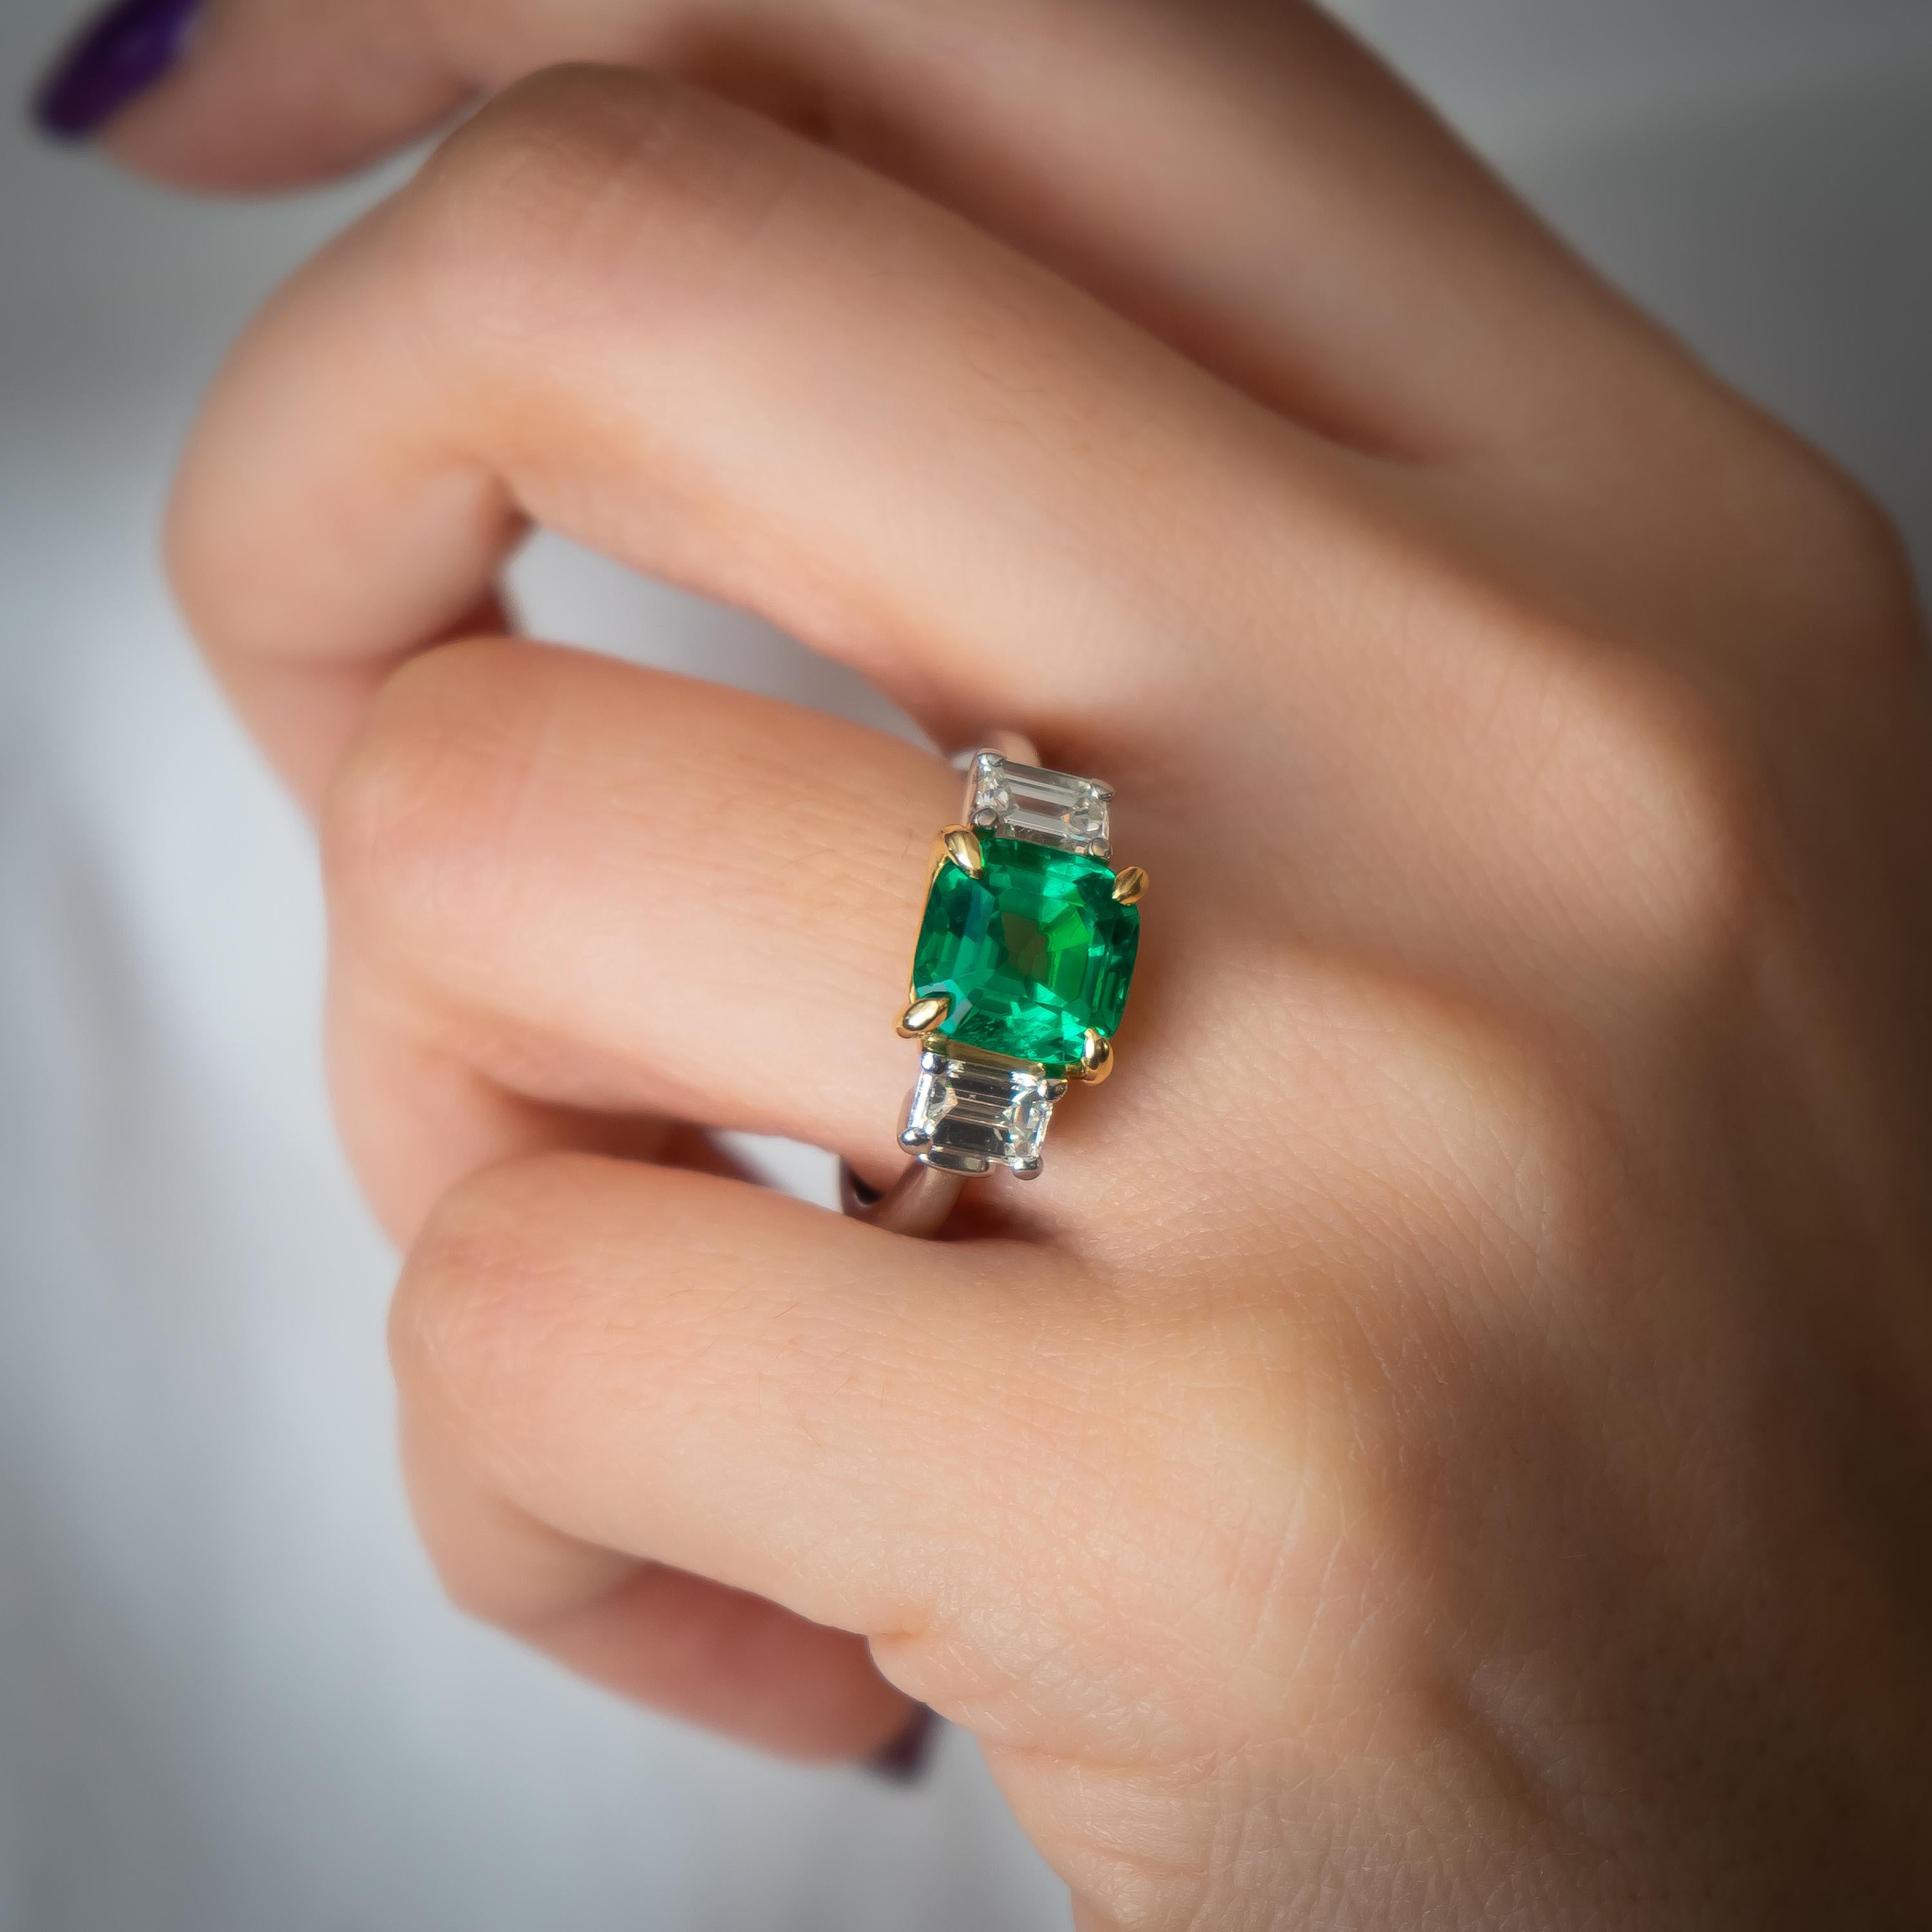 A Colombian emerald and diamond ring, set with a 2.40ct cushion shaped step-cut emerald, in an 18ct yellow, gold four-claw setting, accompanied by GIA certificate 5172407807, stating that the emerald shows characteristics of Colombian origin and no